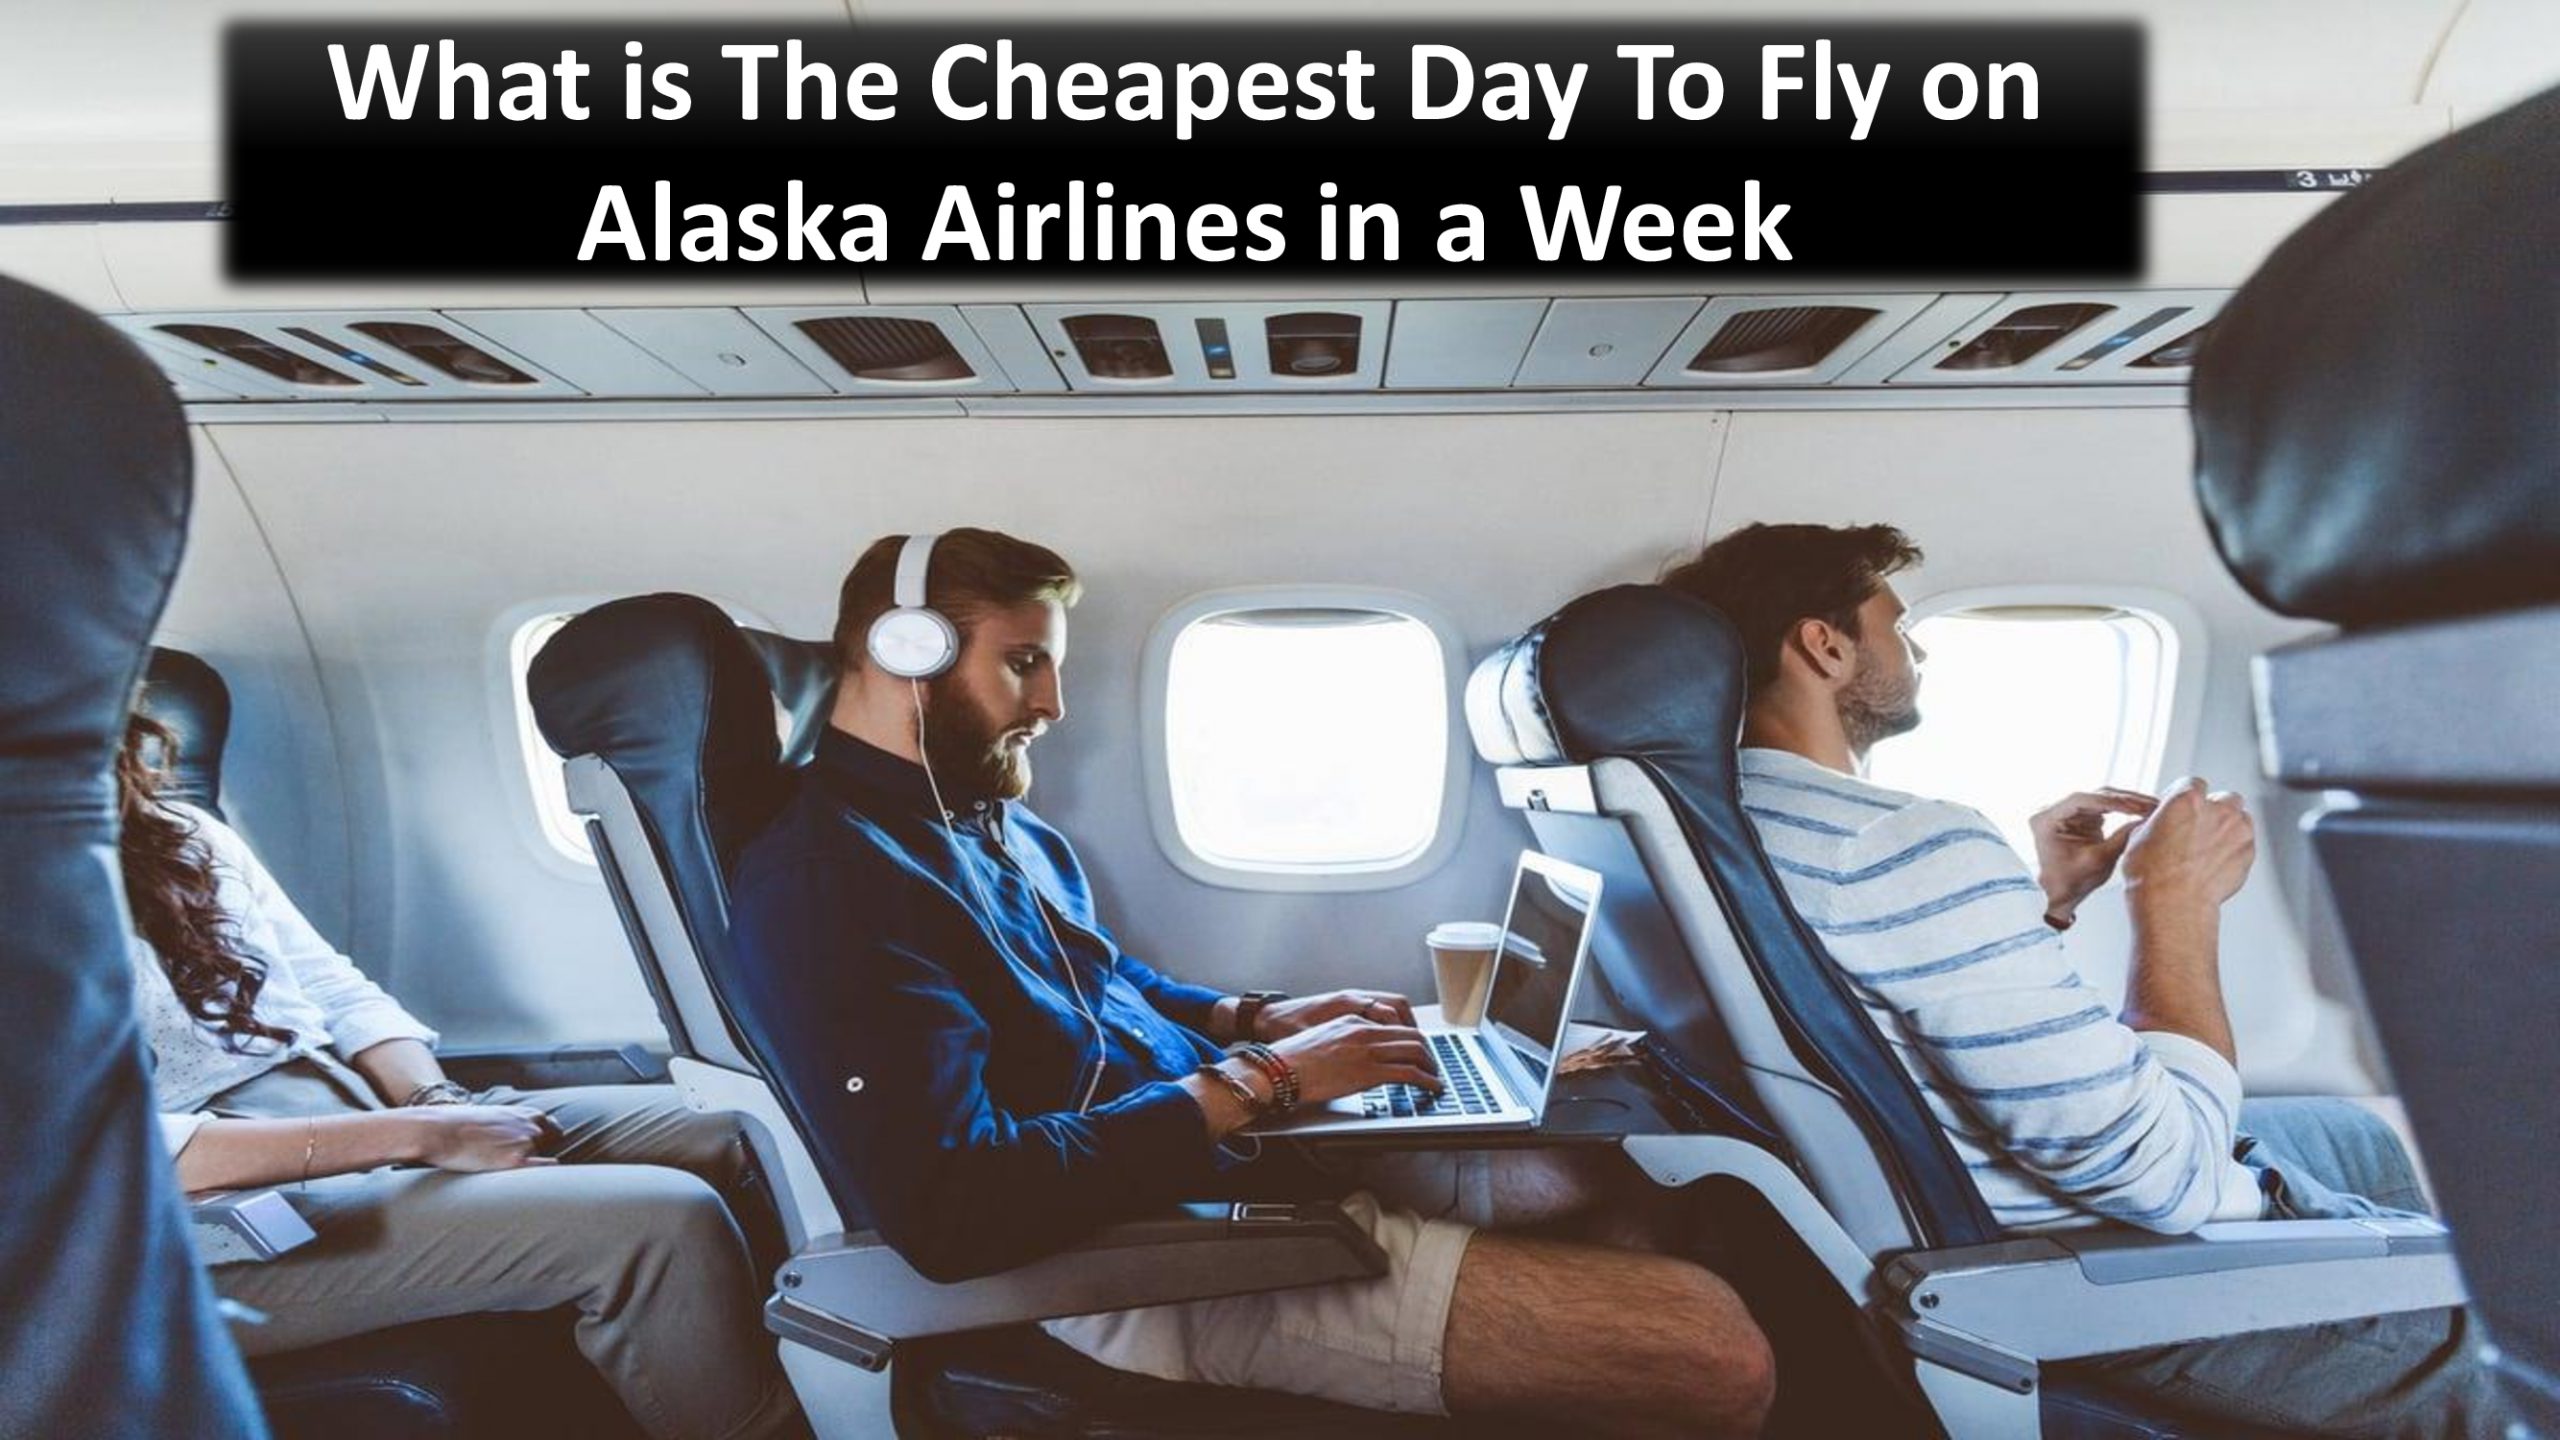 What is the cheapest day to fly on Alaska Airlines in a week?